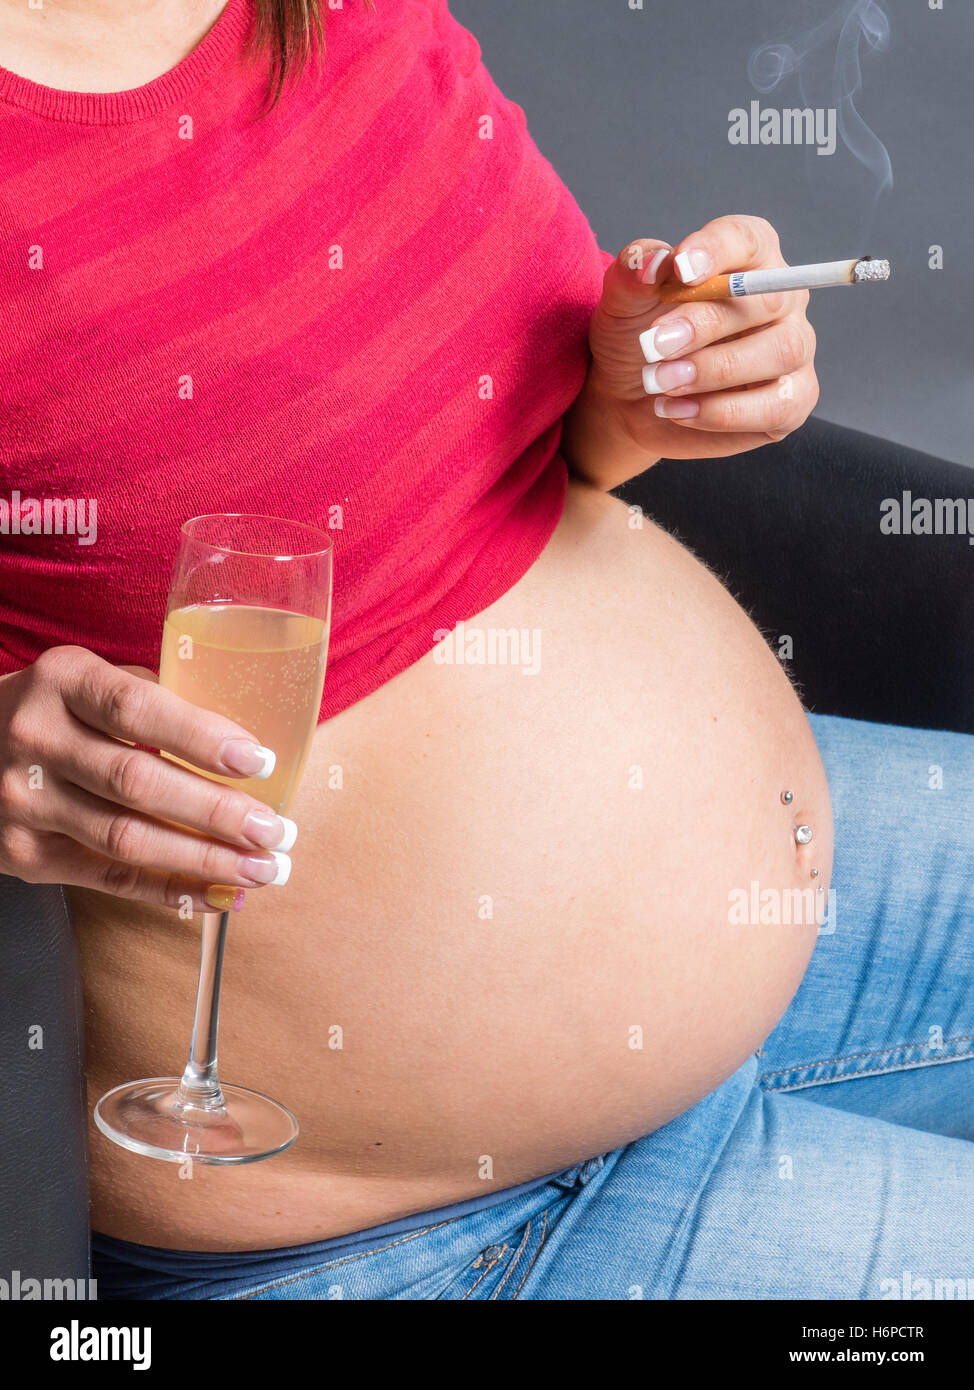 pregnant woman drinking Alcohol an smoking cigarette. Stock Photo